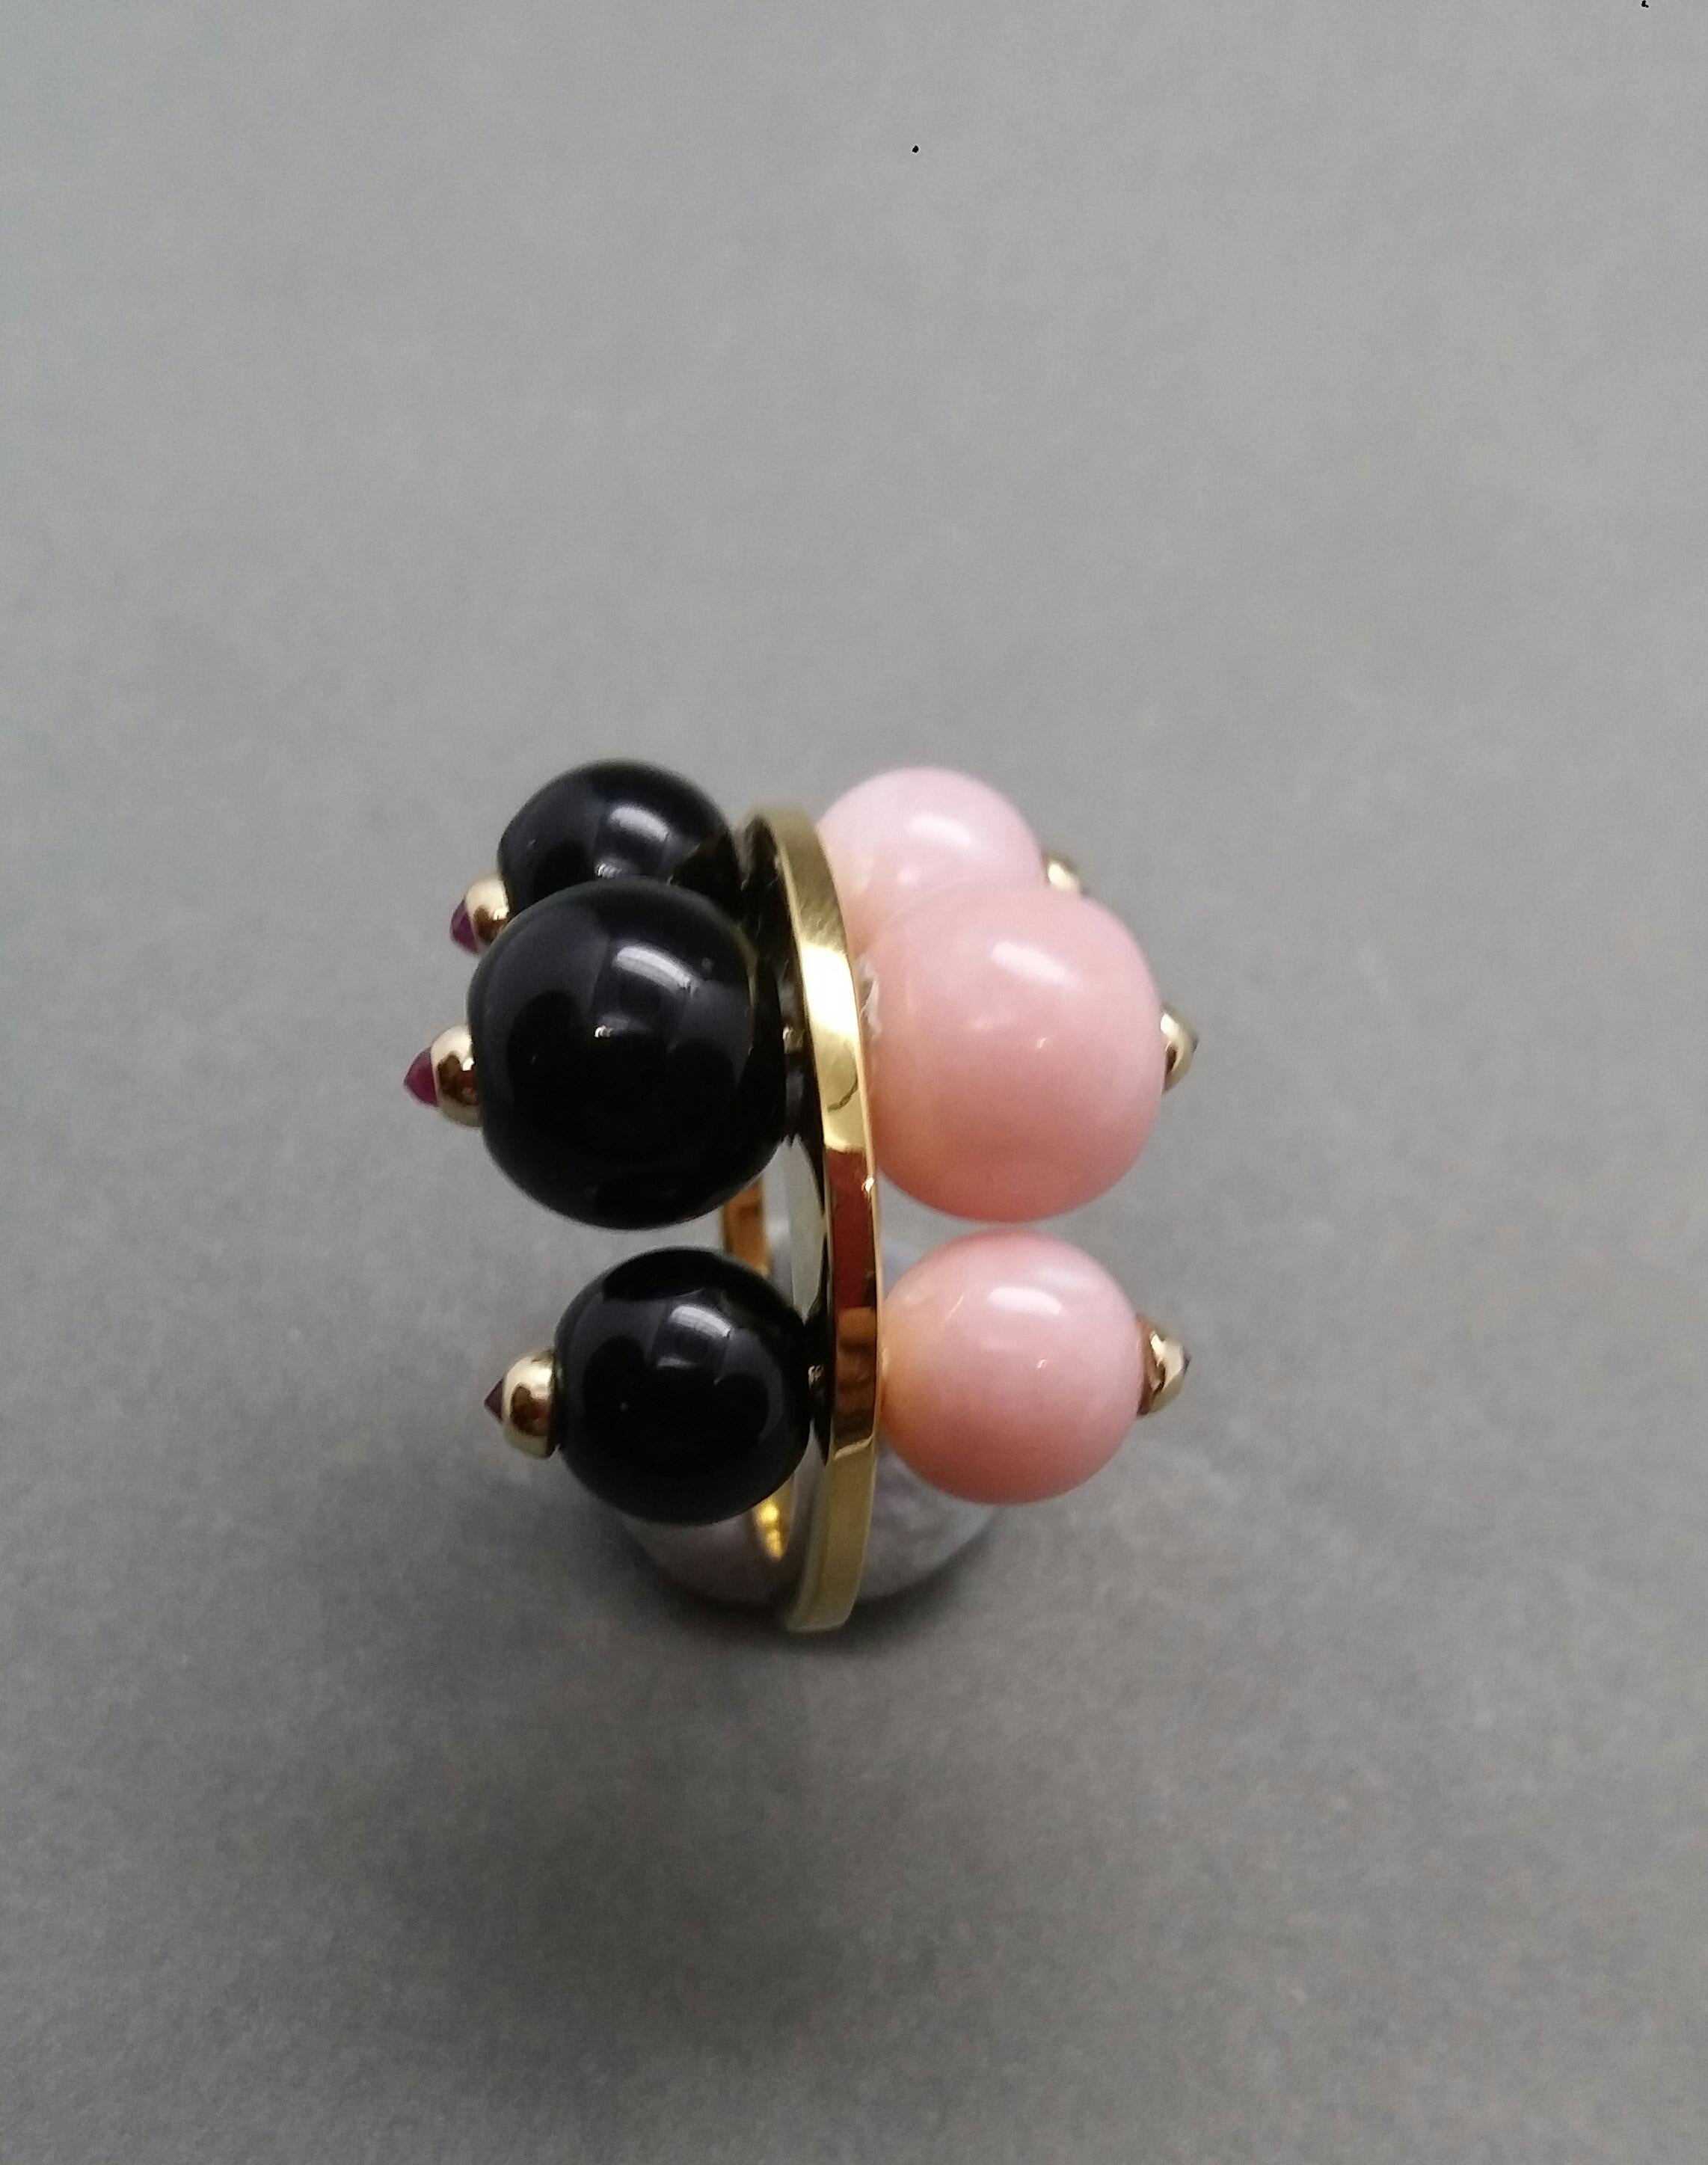 14 Karat Gold Black Onyx and Pink Opal Round Beads Rubies Black Diamonds Ring For Sale 2